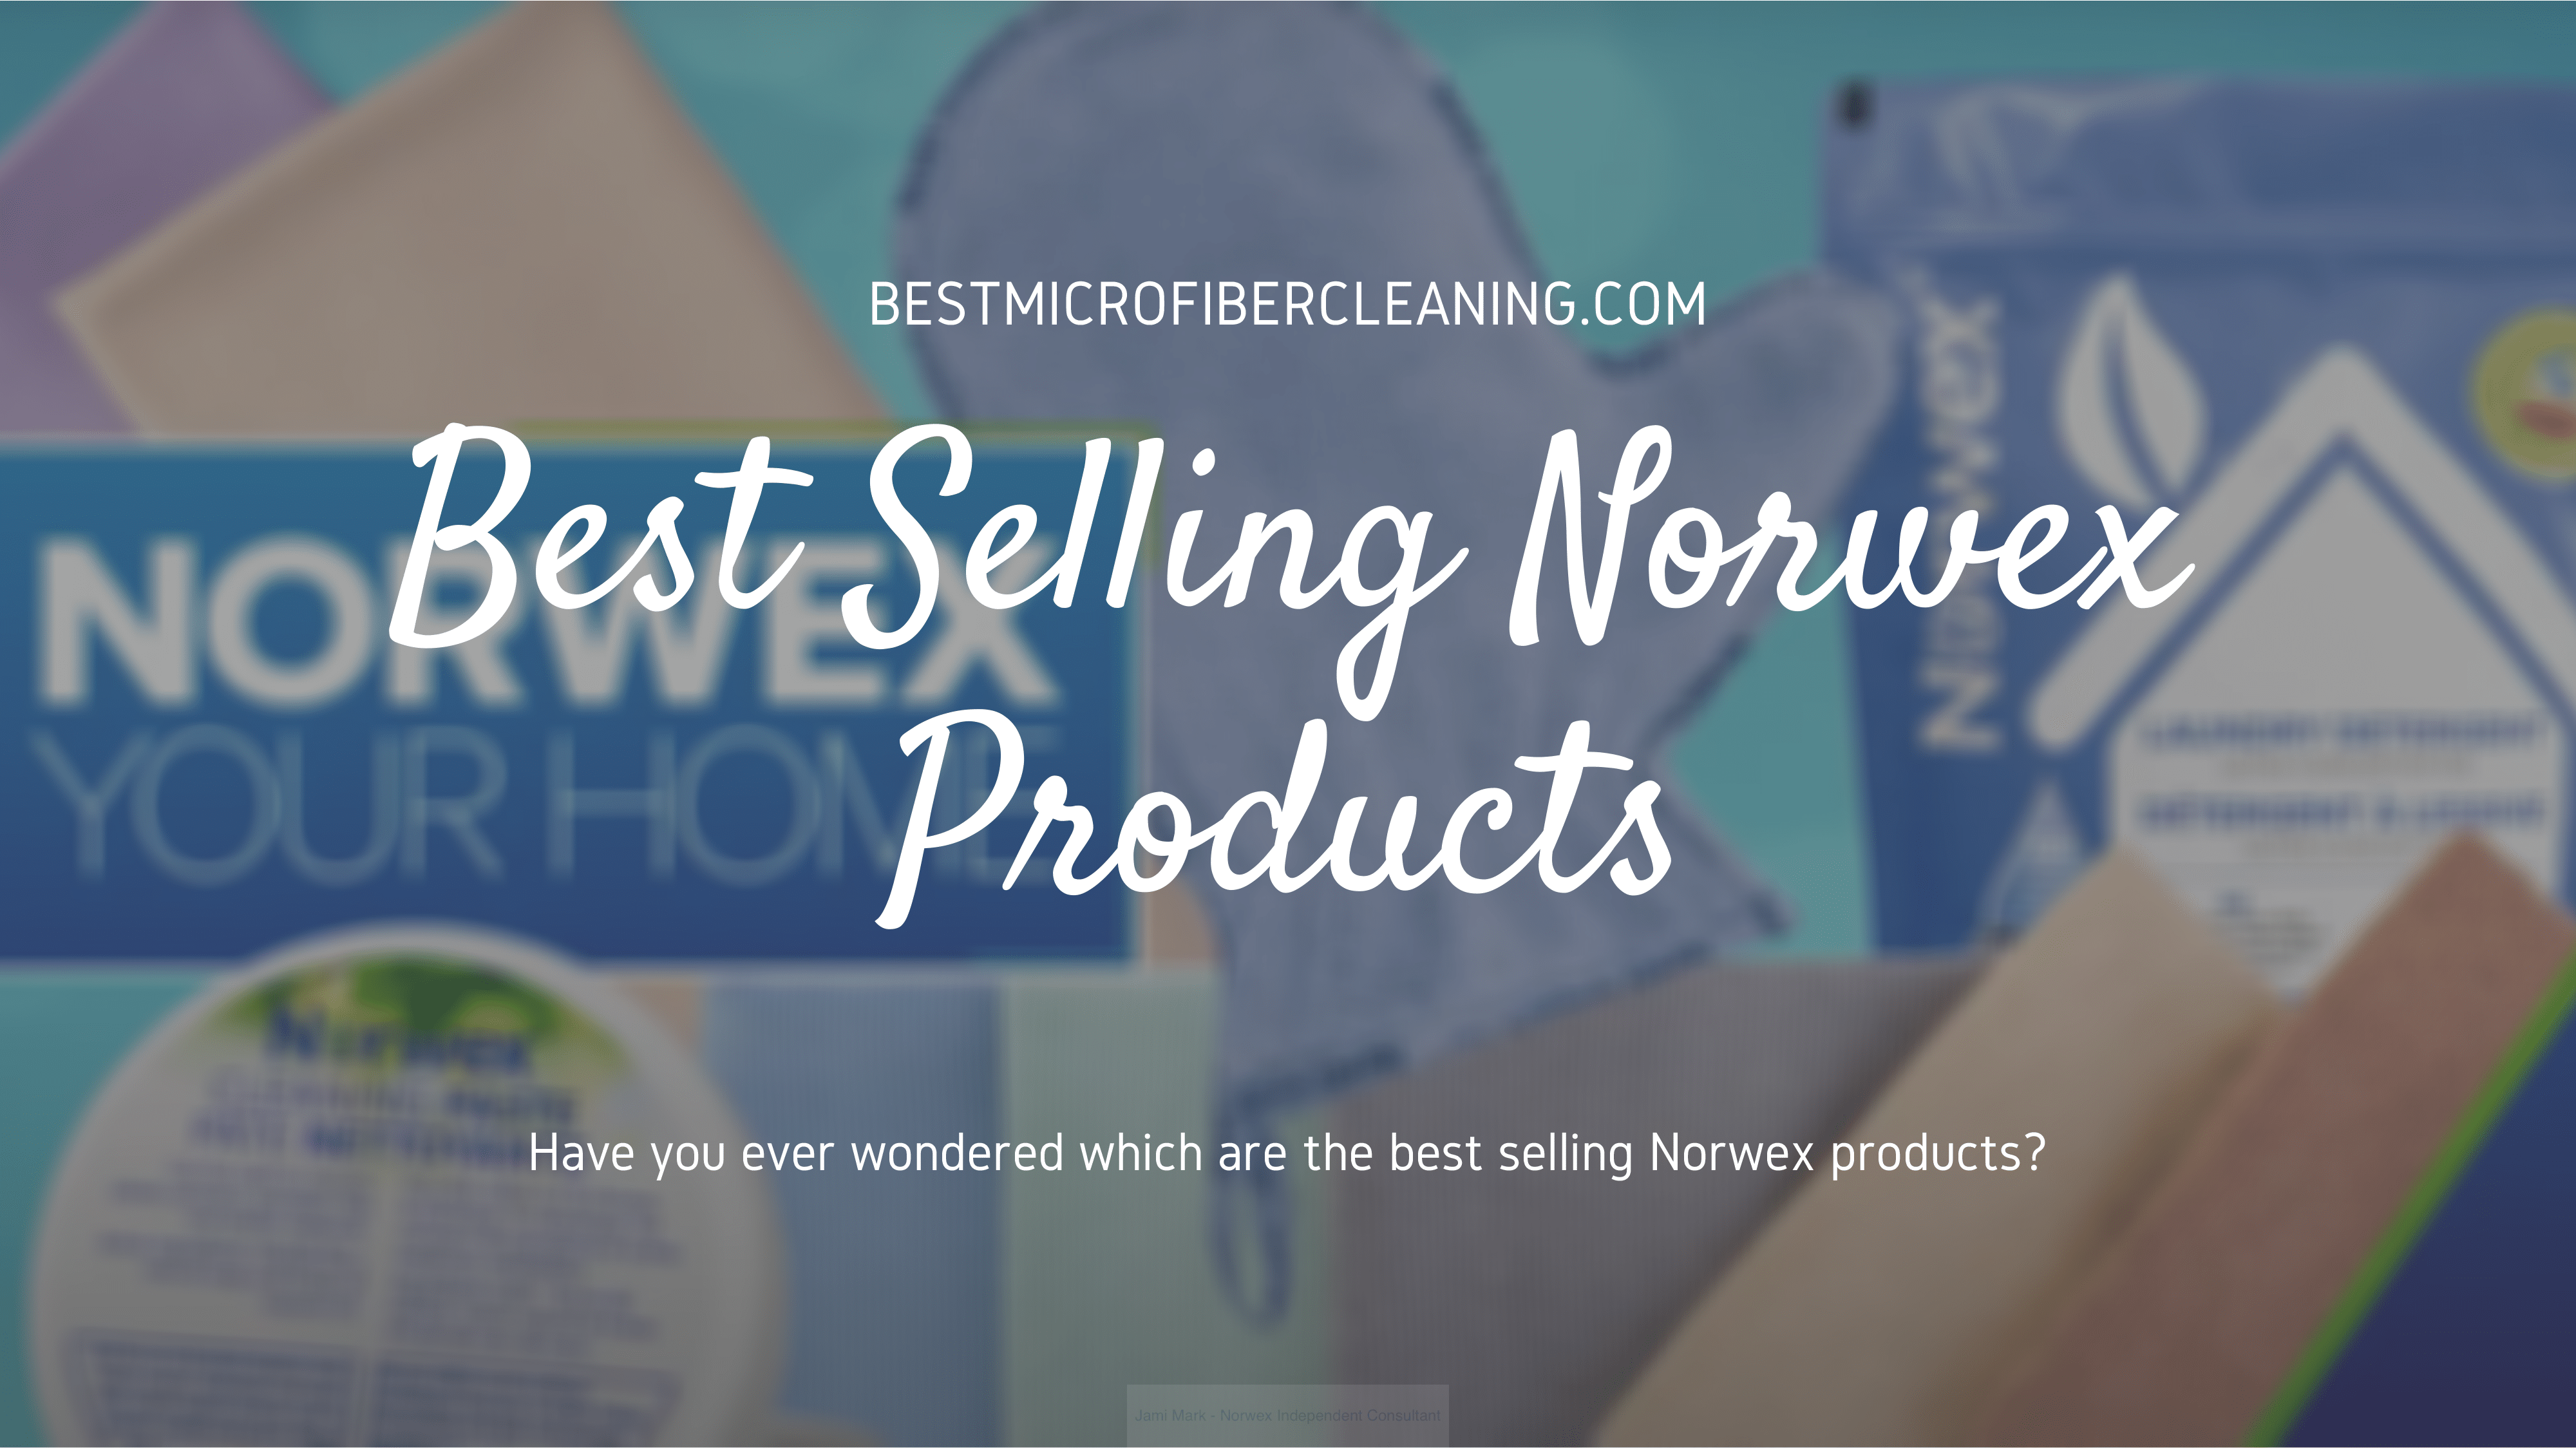 https://bestmicrofibercleaning.com/wp-content/uploads/2020/05/best-selling-norwex-products.png